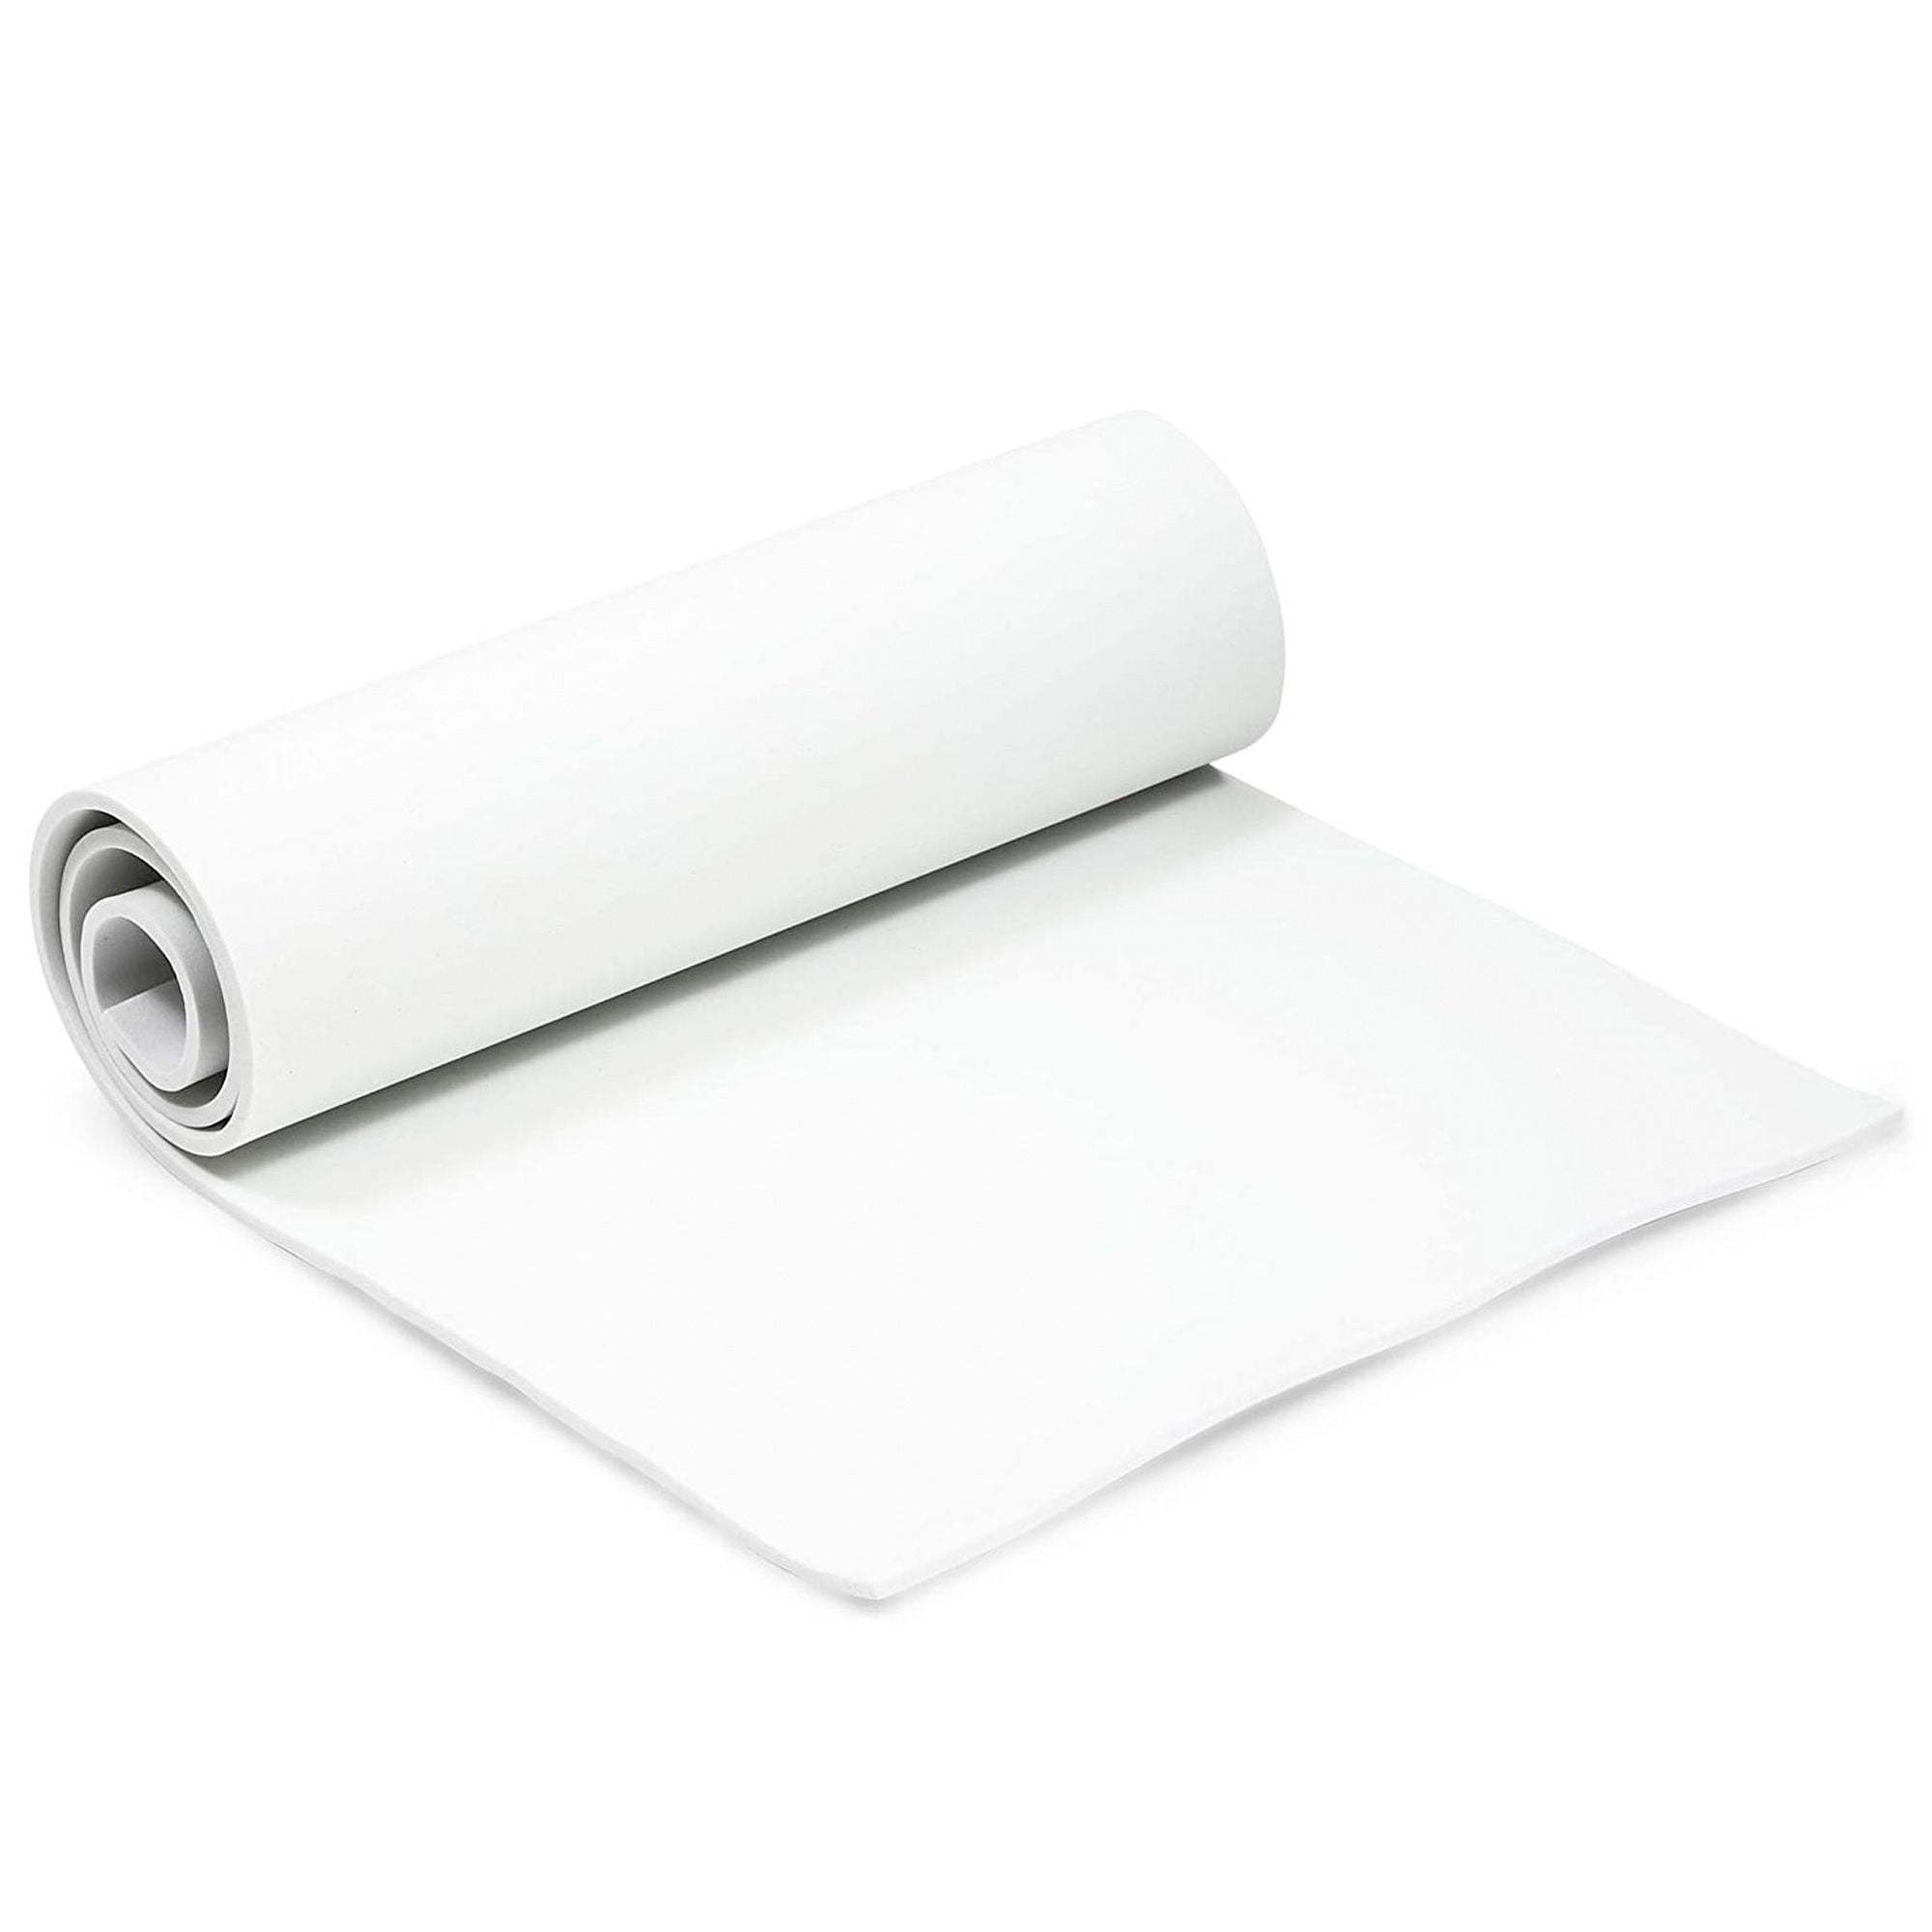 2mm White EVA Foam Sheets for Kids Crafts, Cosplay Costumes (13.7